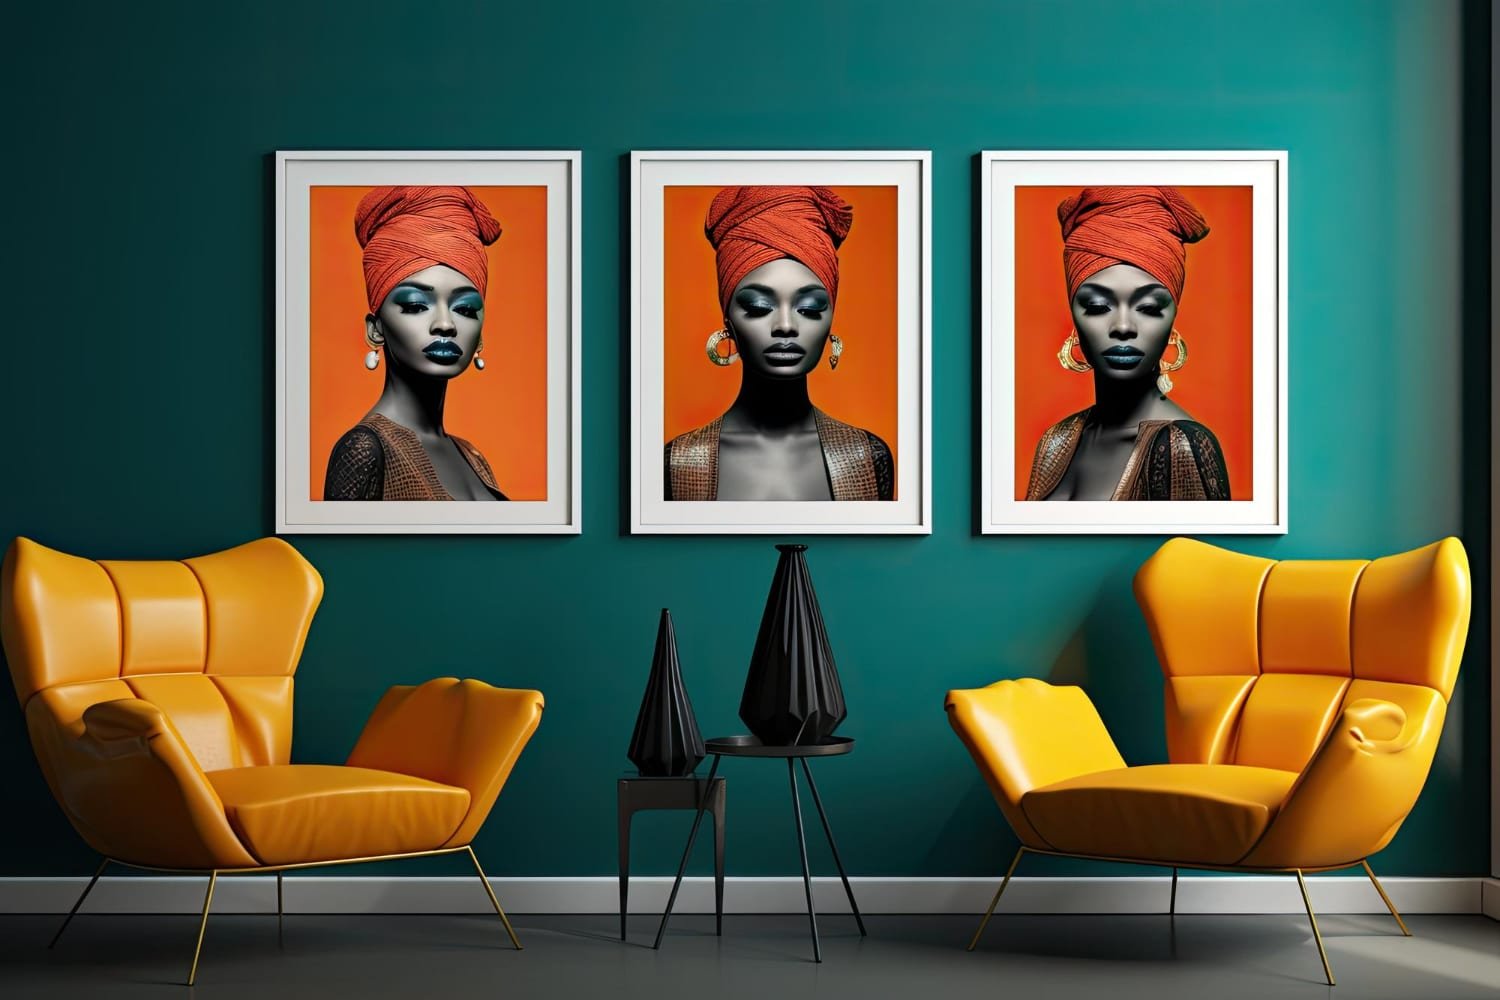 Decorate Your Walls With Allposters.com’s Artistic Posters